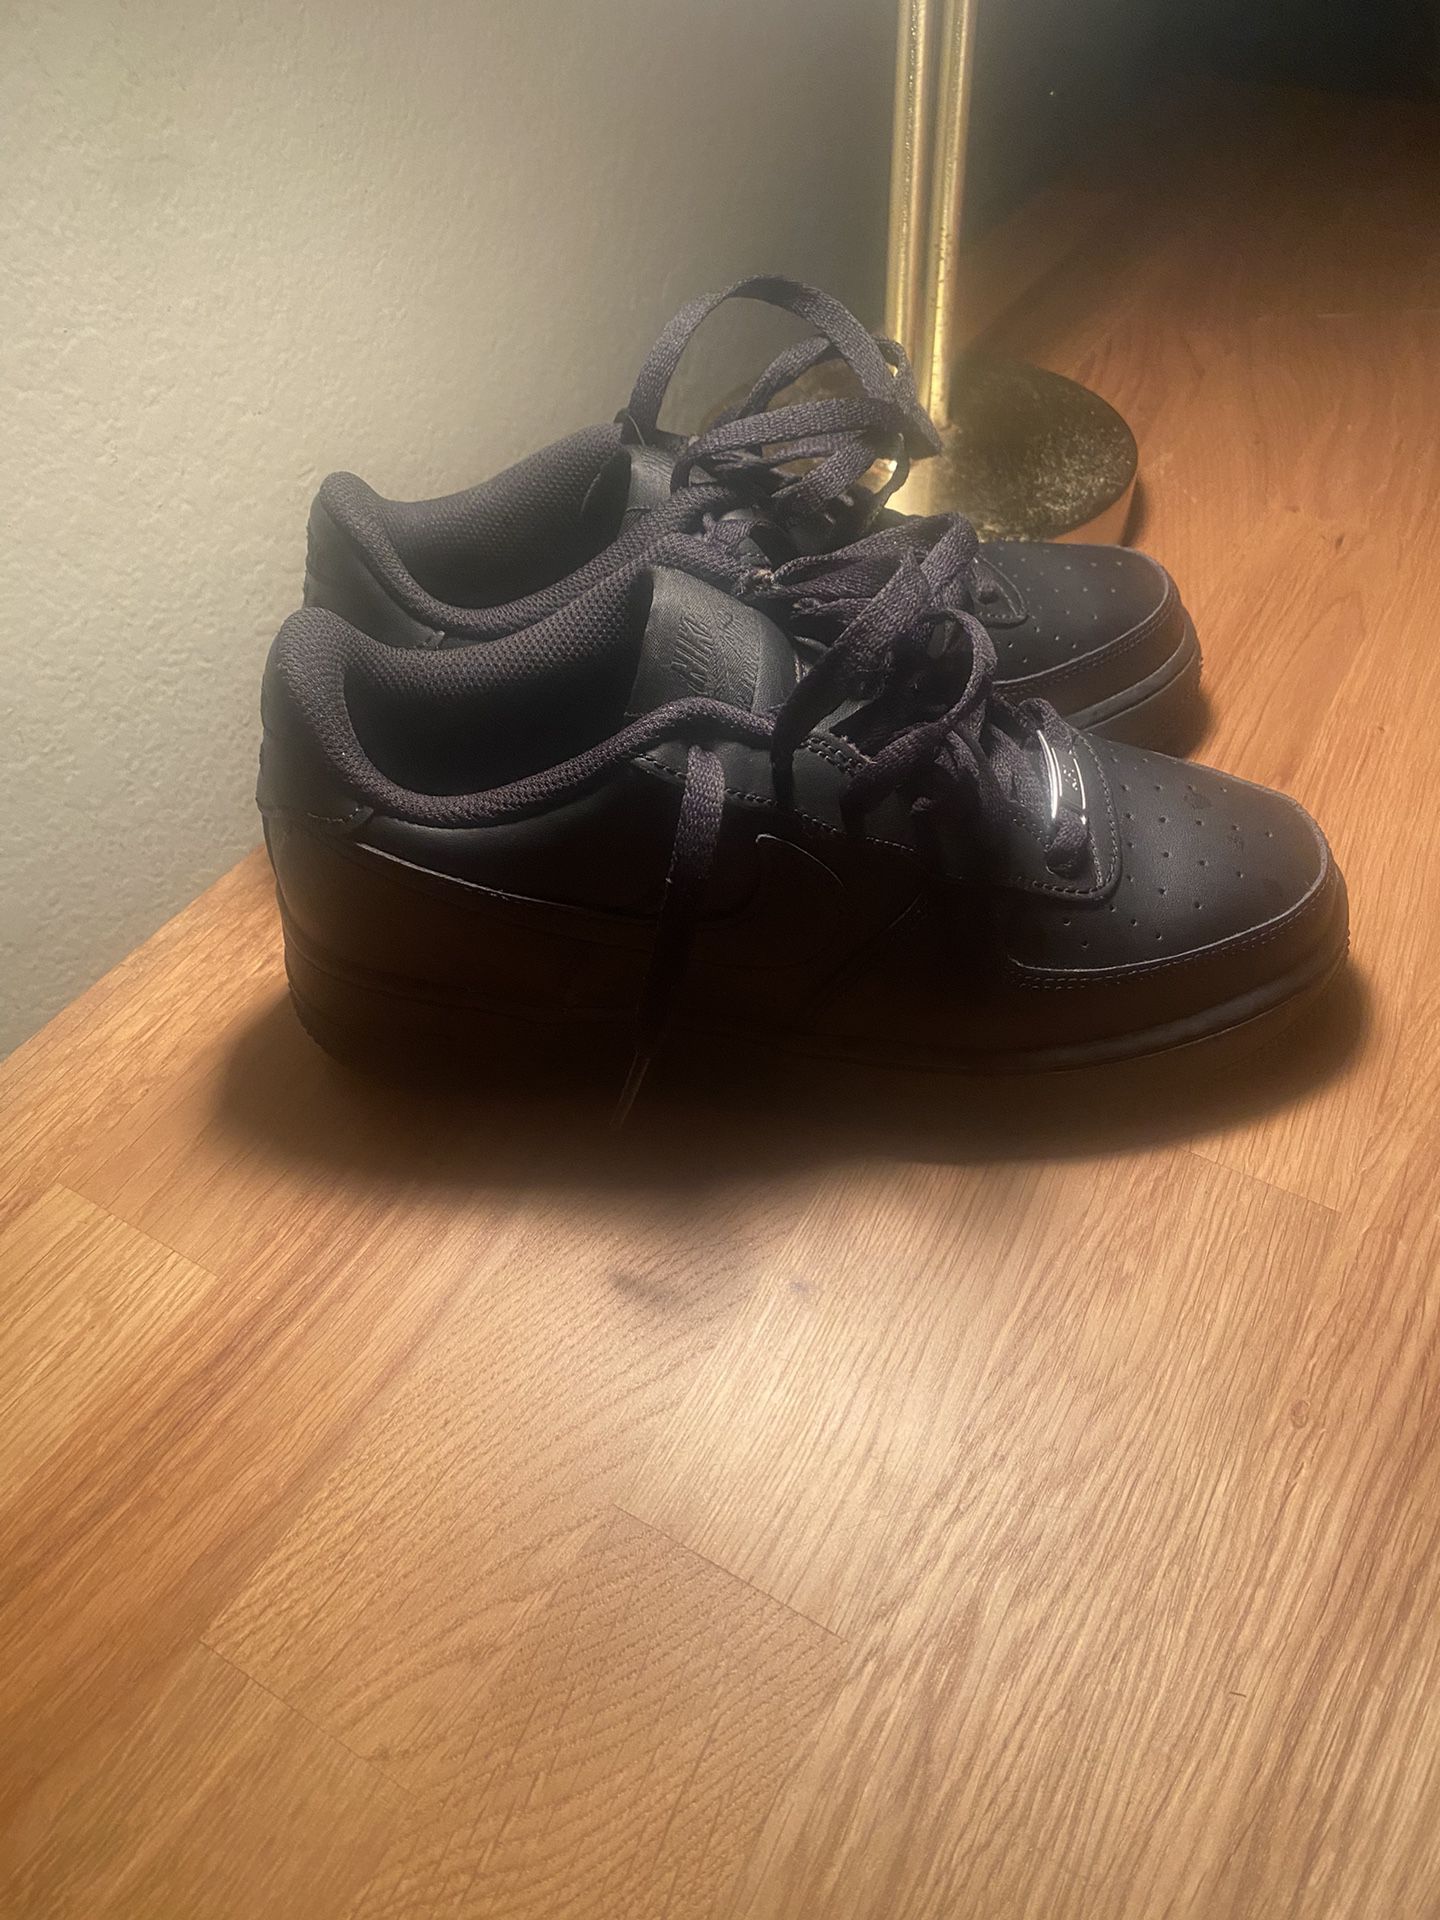 Women Black Air Force’s FOR SALE!